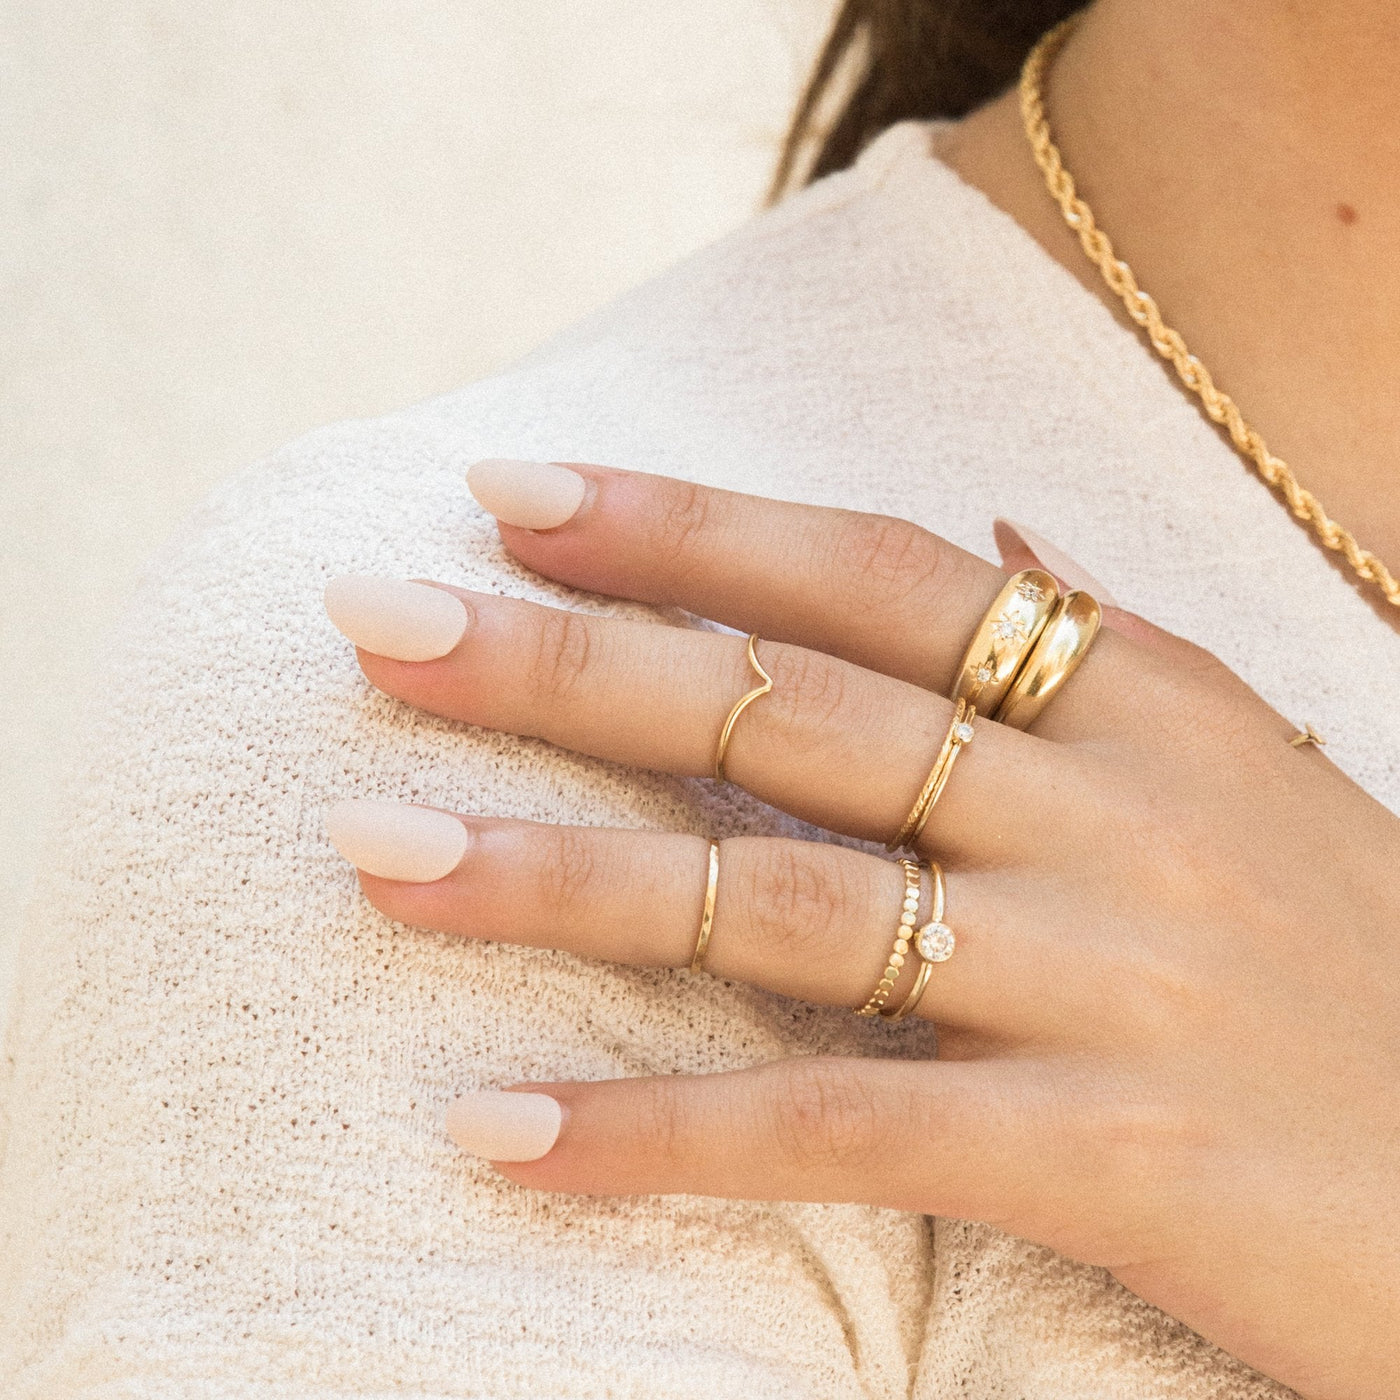 Chevron Ring by Simple & Dainty Jewelry